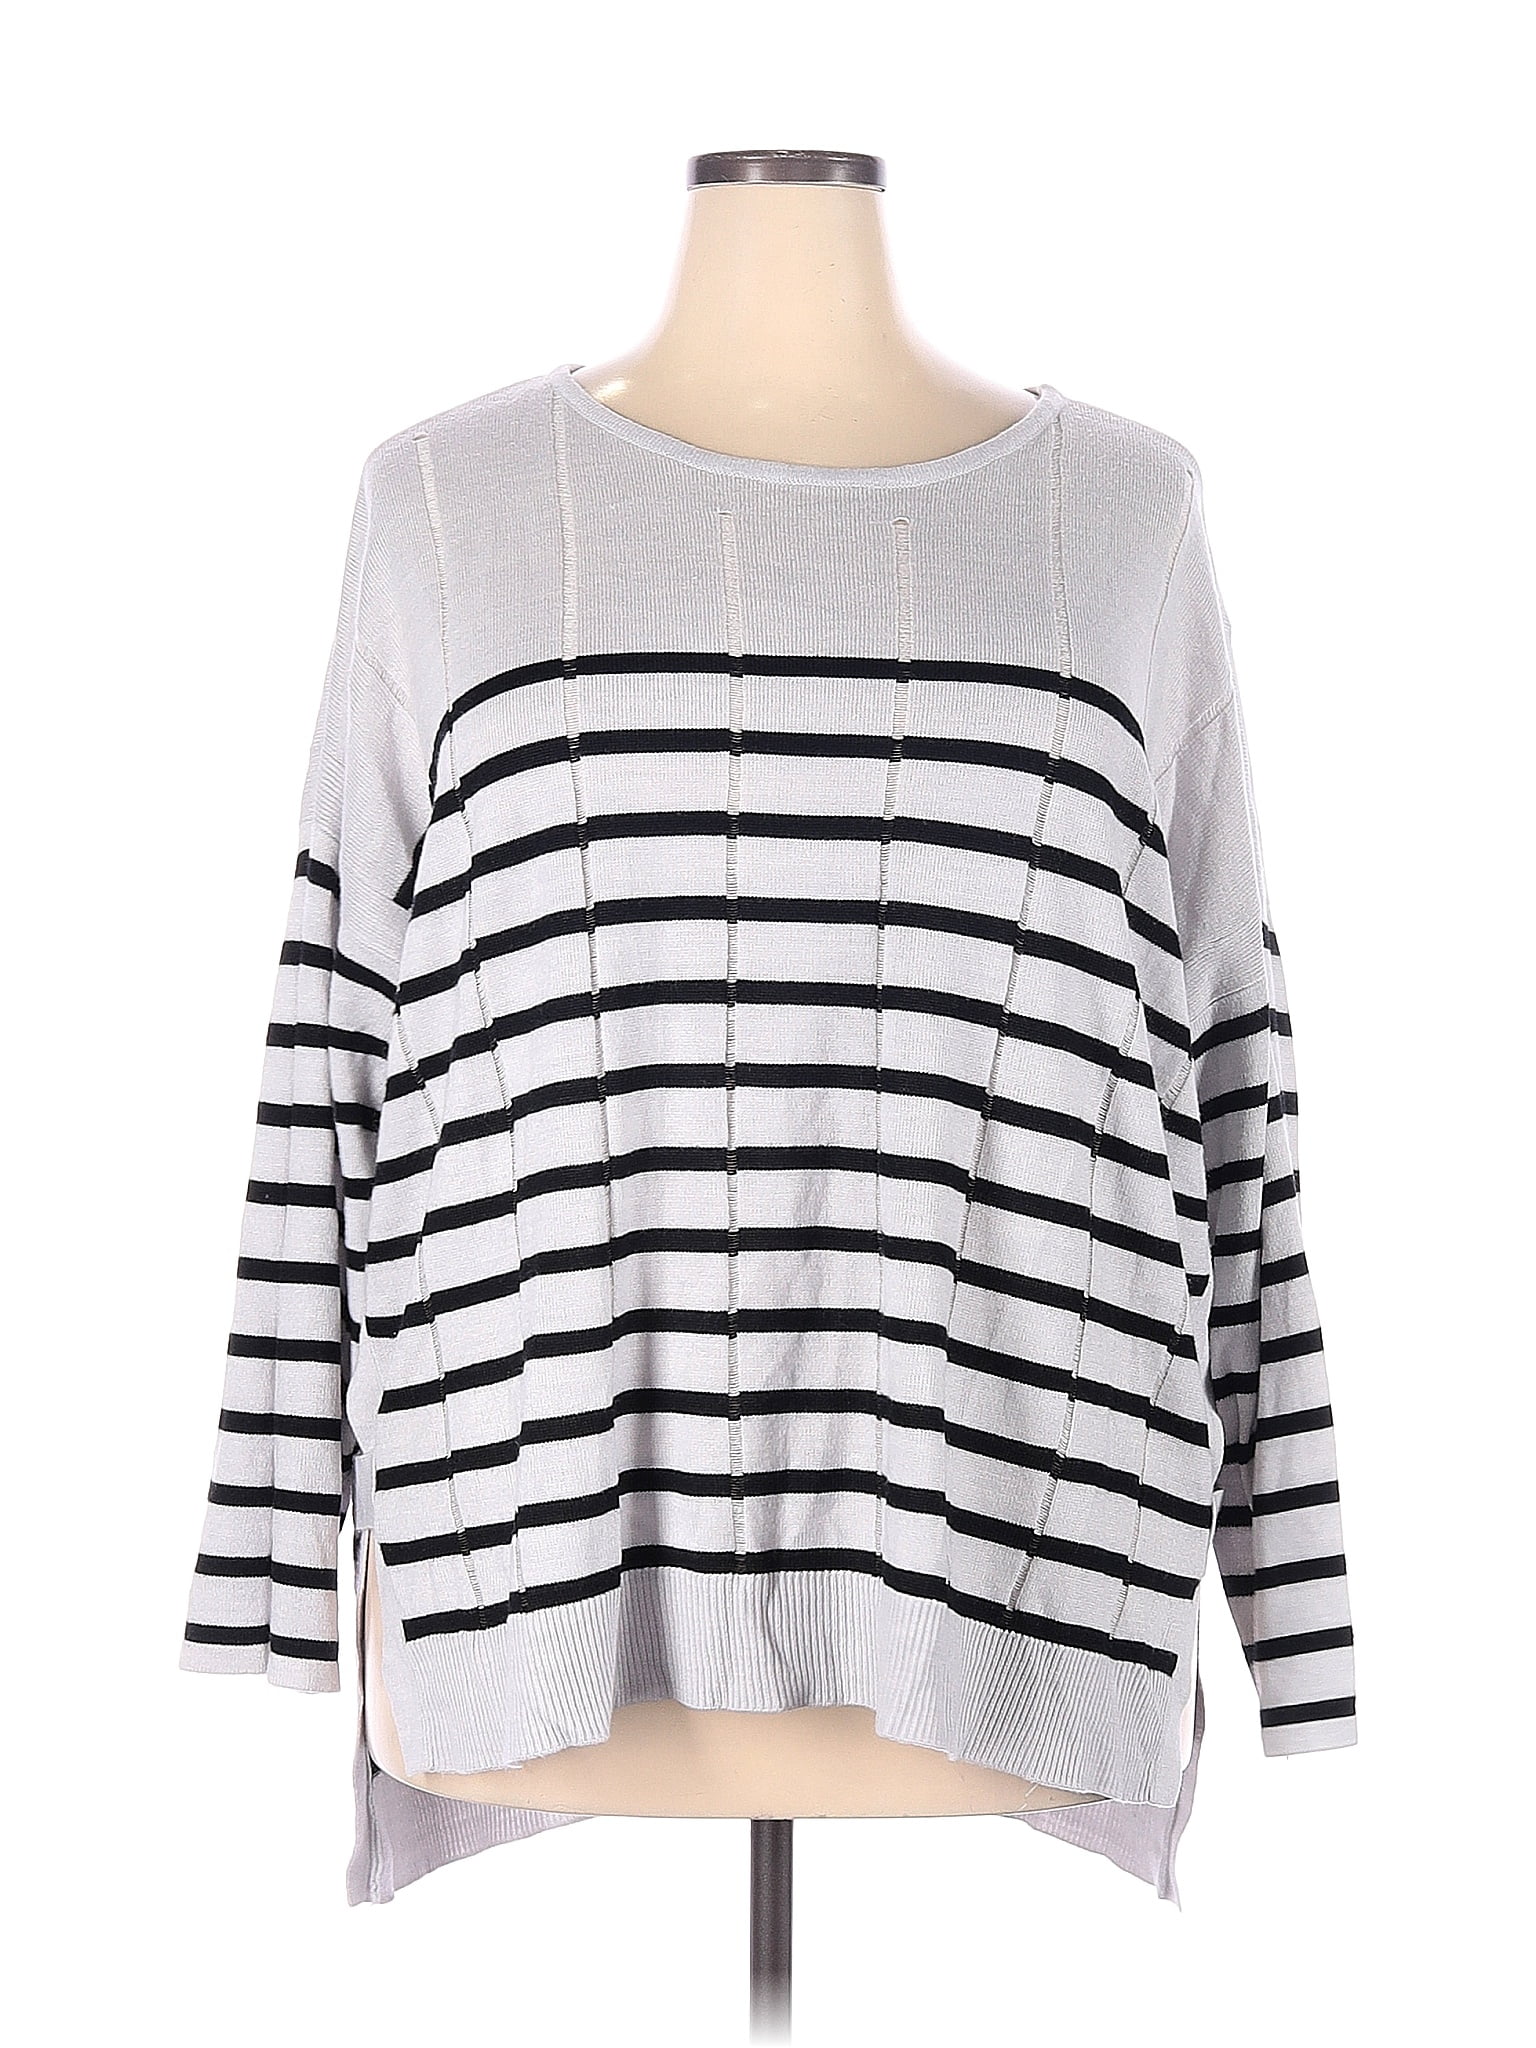 Molly & Isadora 100% Acrylic Silver Pullover Sweater Size 3X (Plus ...